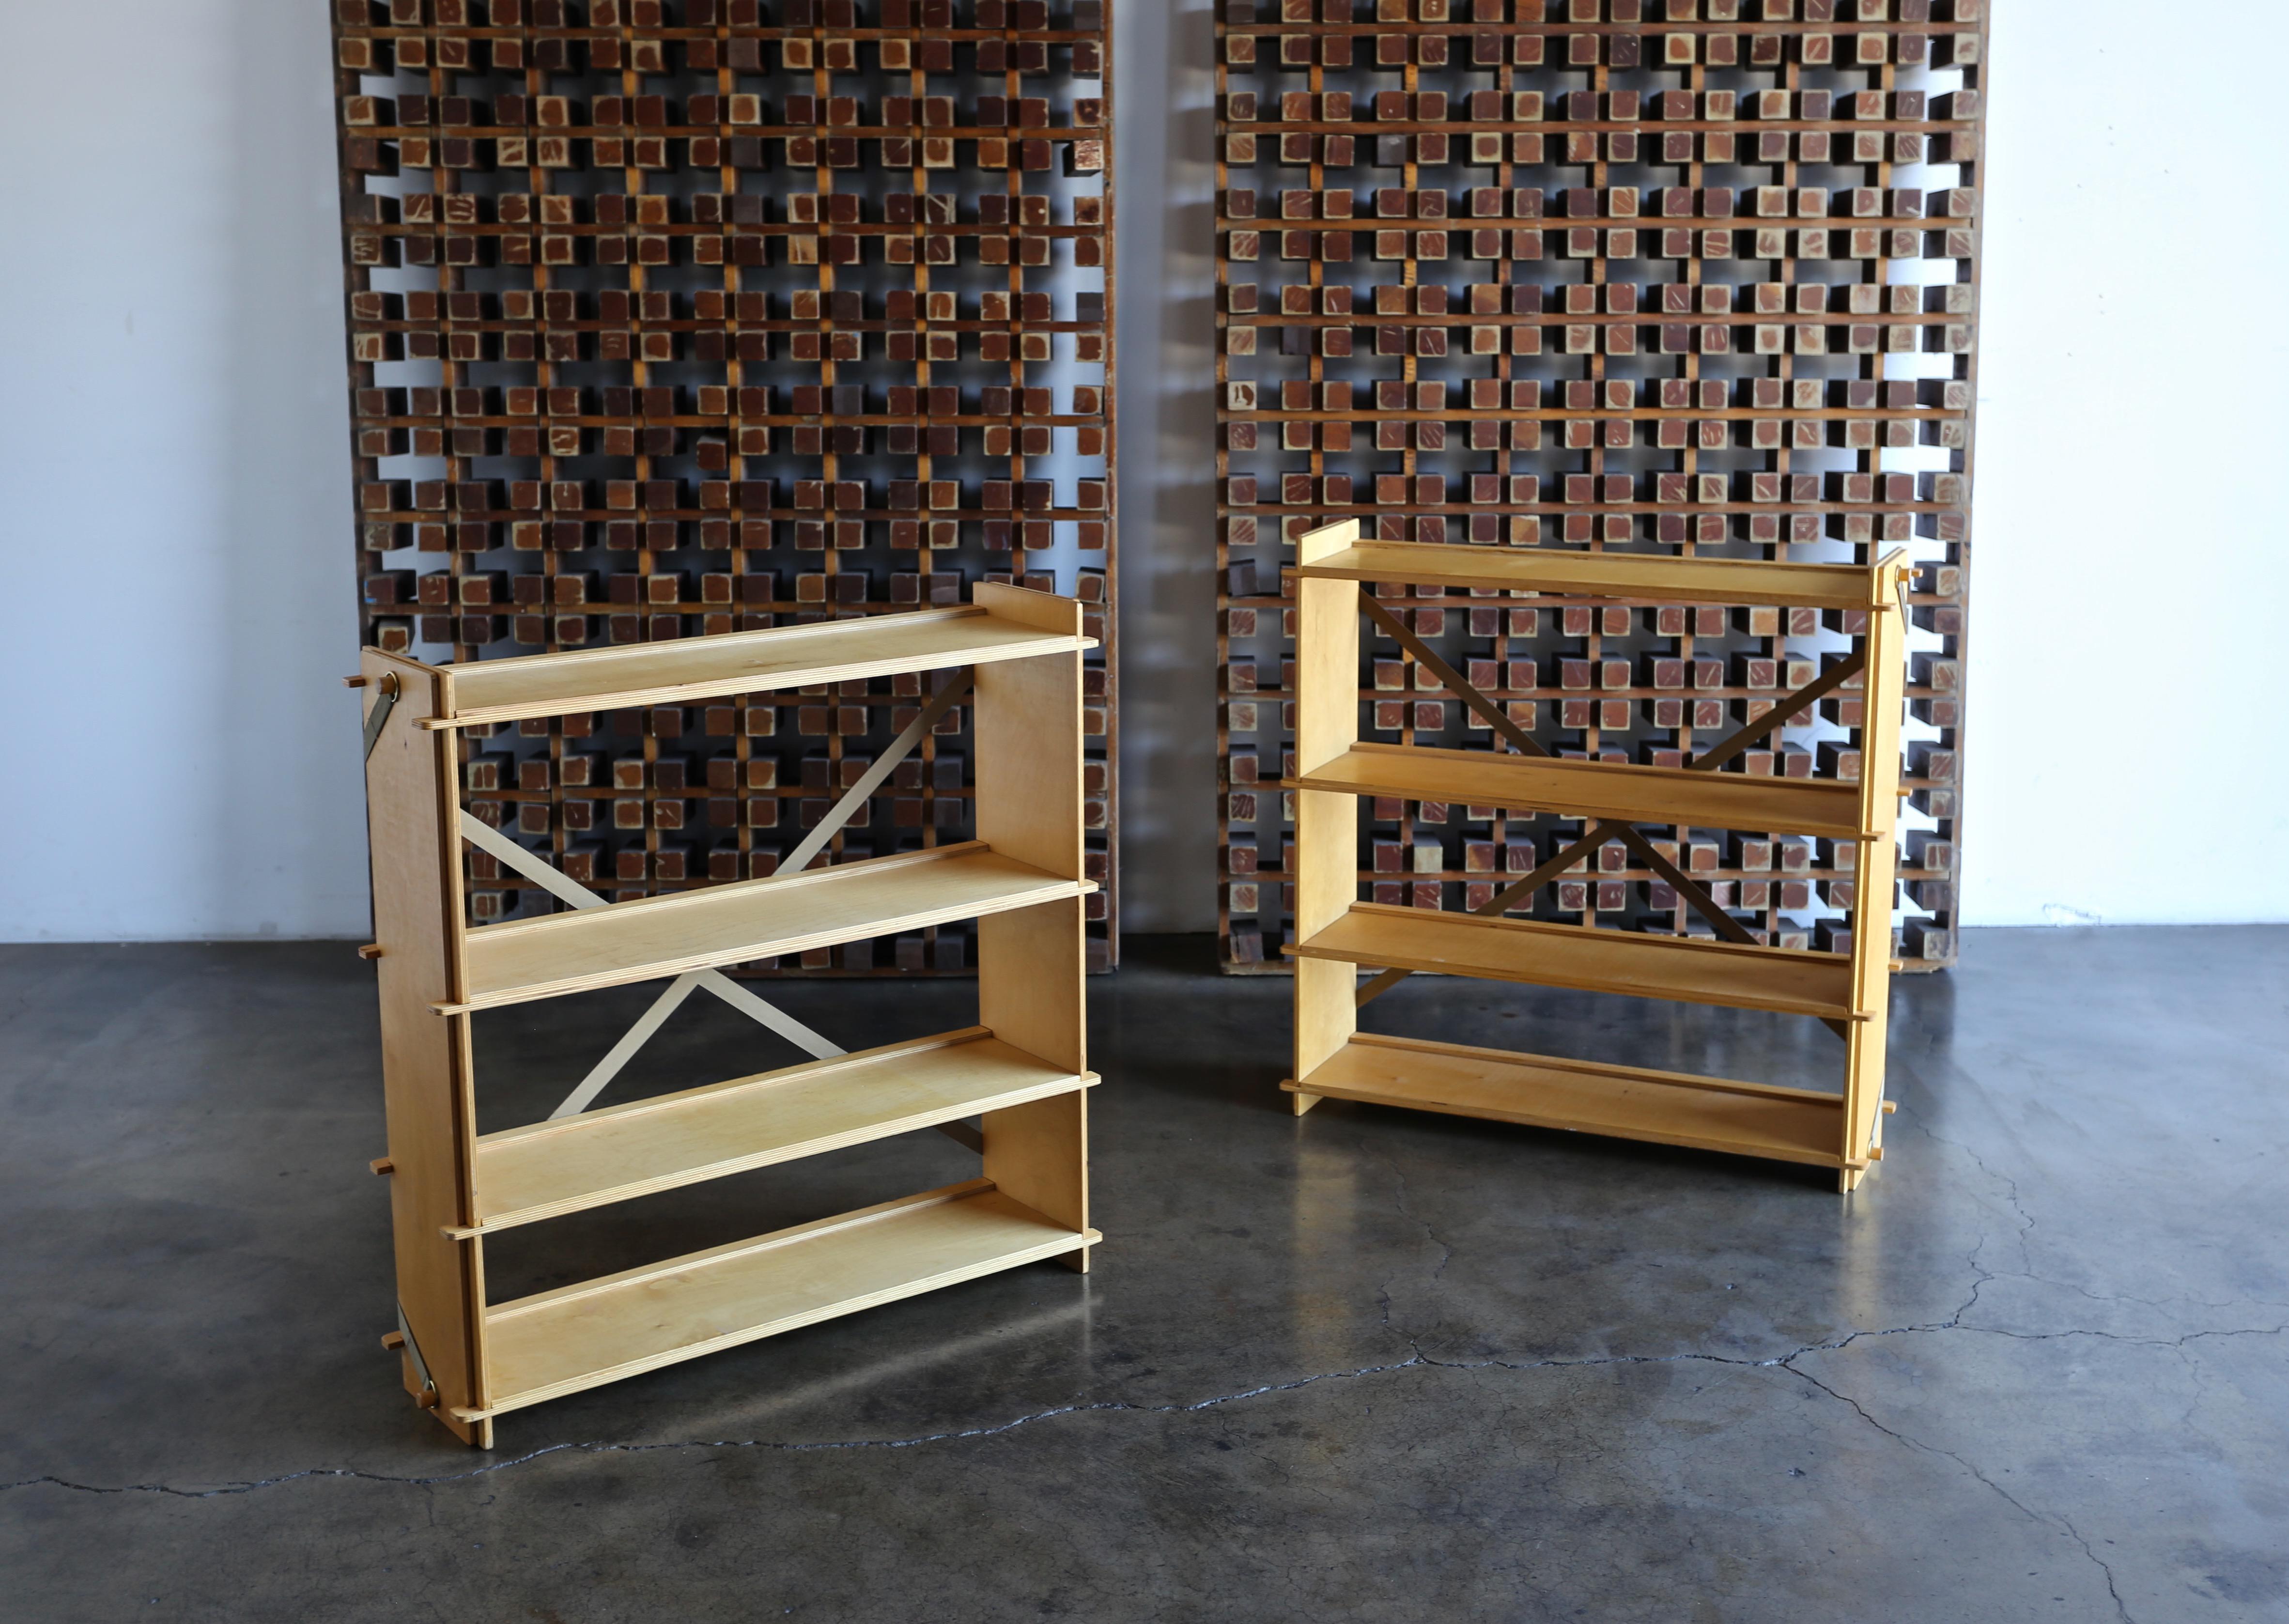 Pair of modernist plywood bookcases, circa 1975.